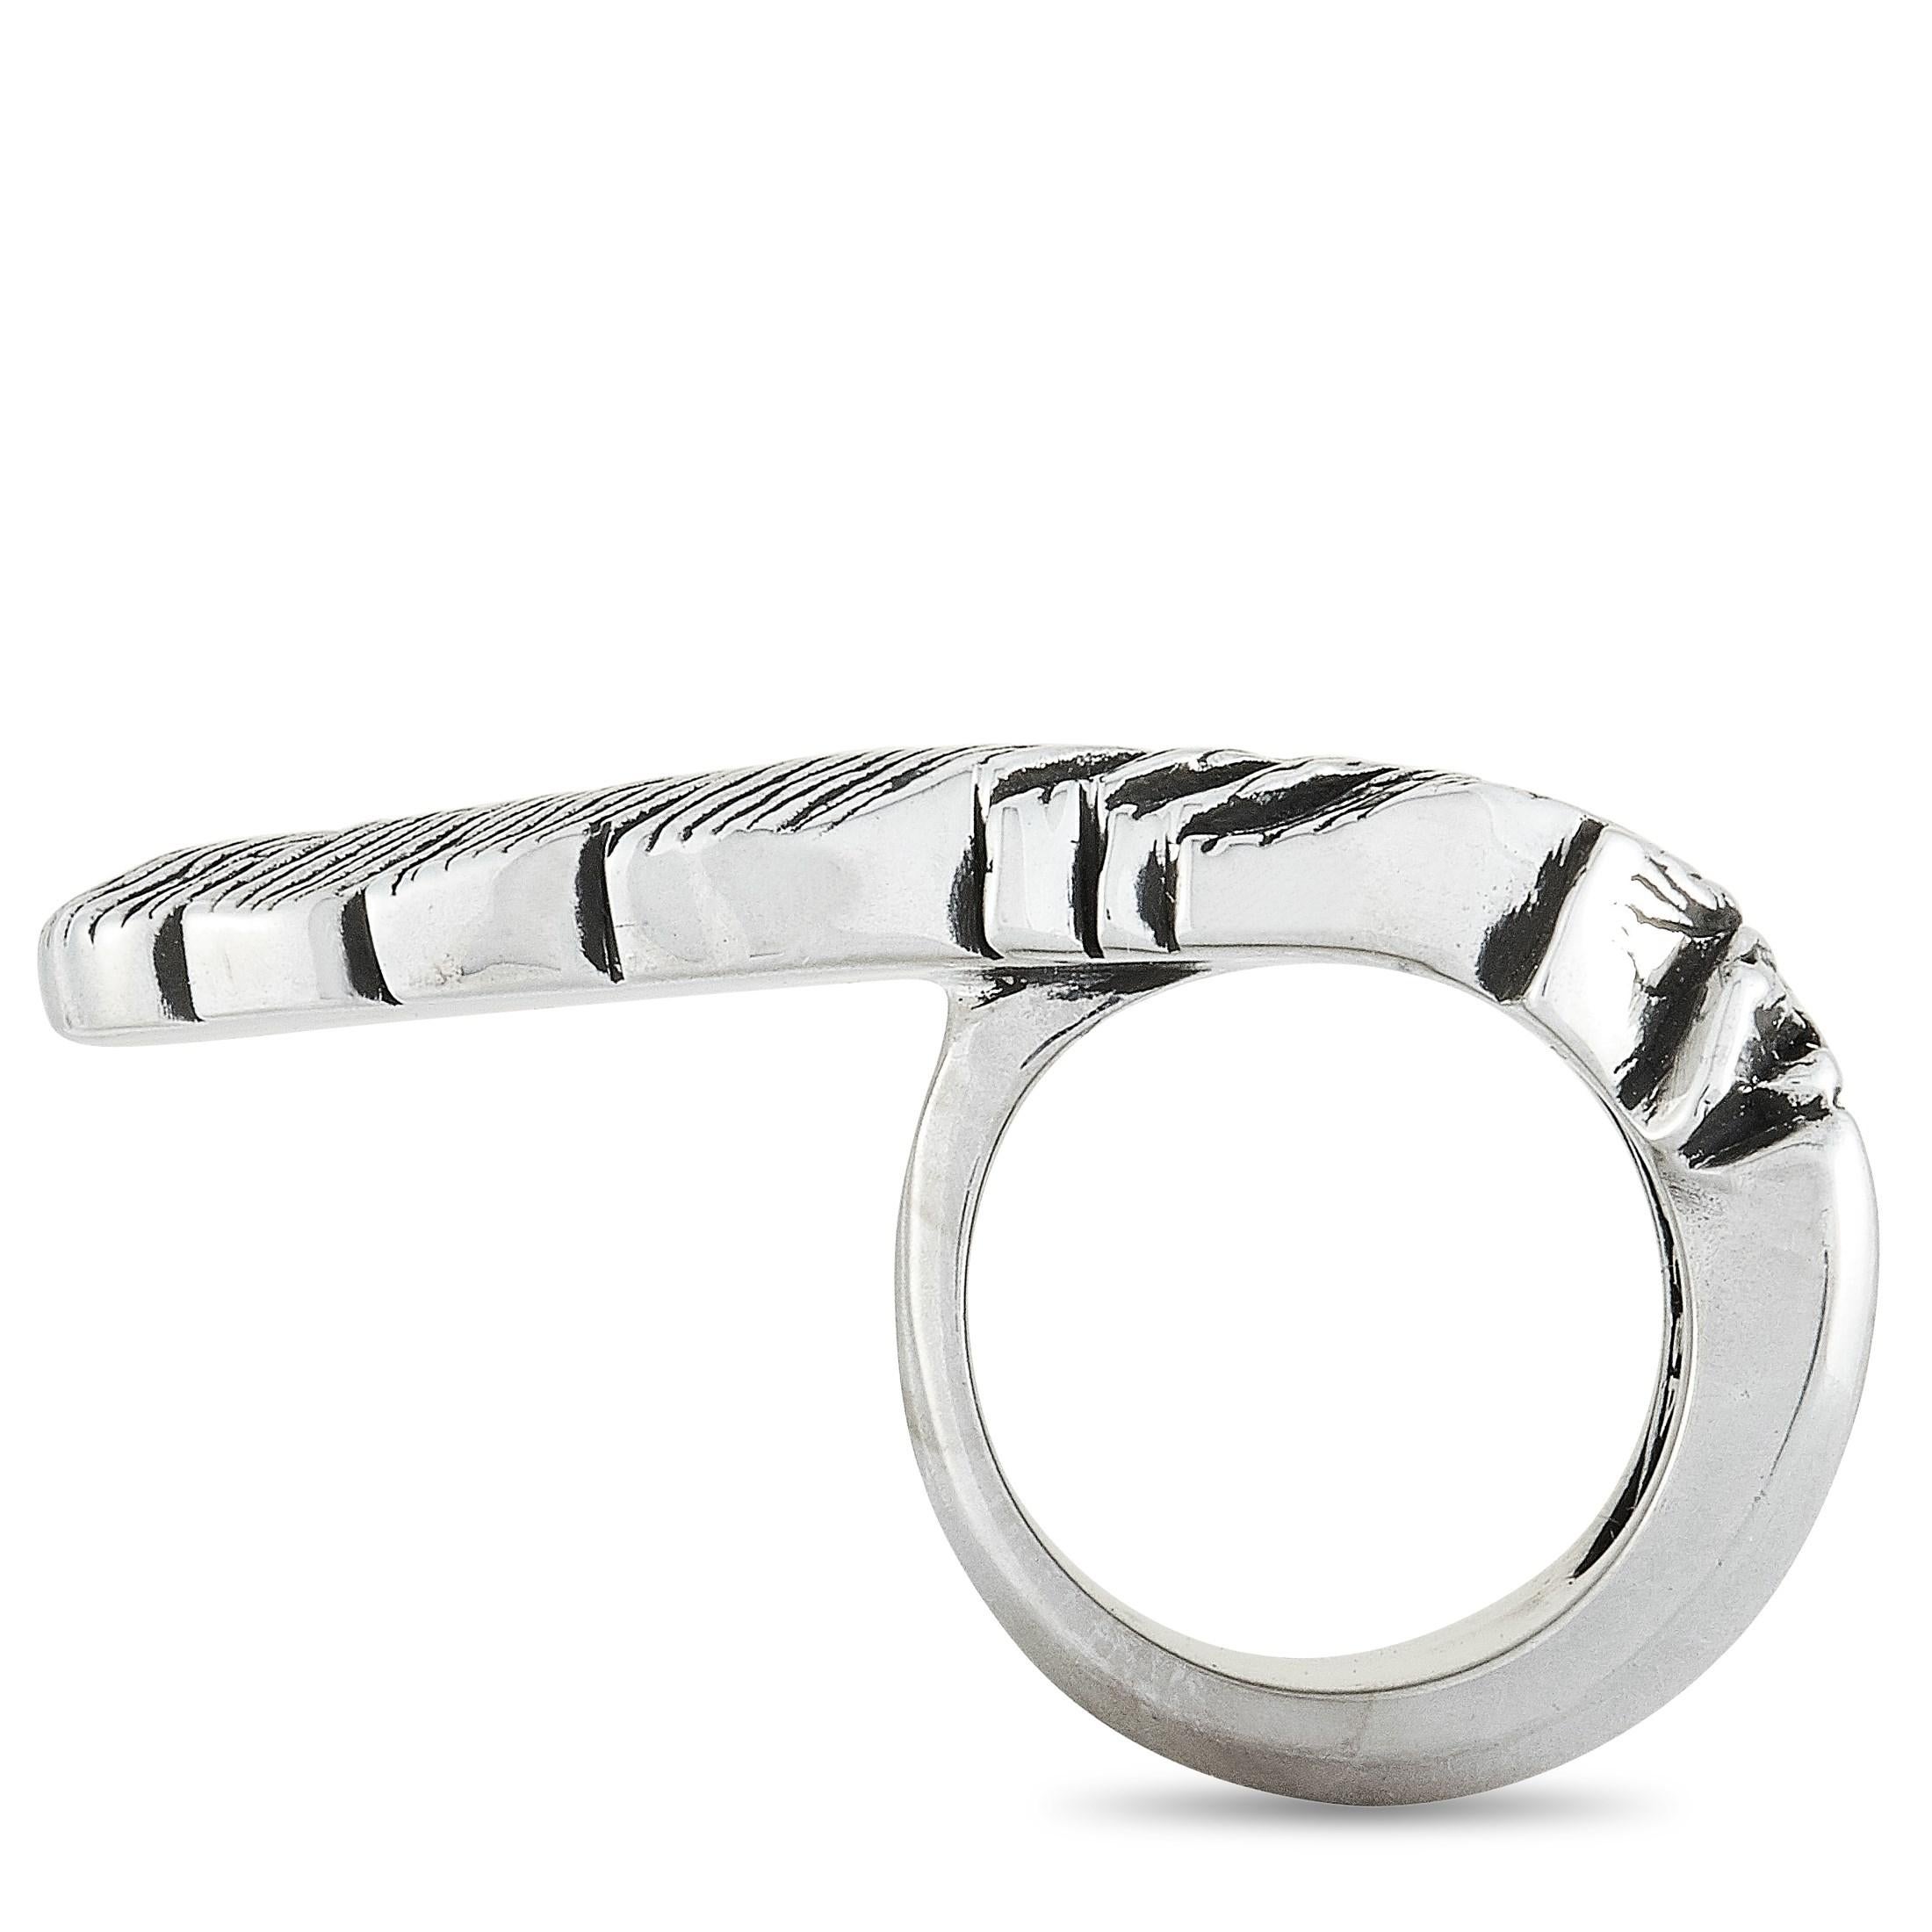 The King Baby “Raven Feather” ring is crafted from silver and weighs 34 grams. The ring boasts a band thickness of 10 mm and a top height of 5 mm, while the top dimensions measure 40 by 14 mm.

This item is offered in brand-new condition and